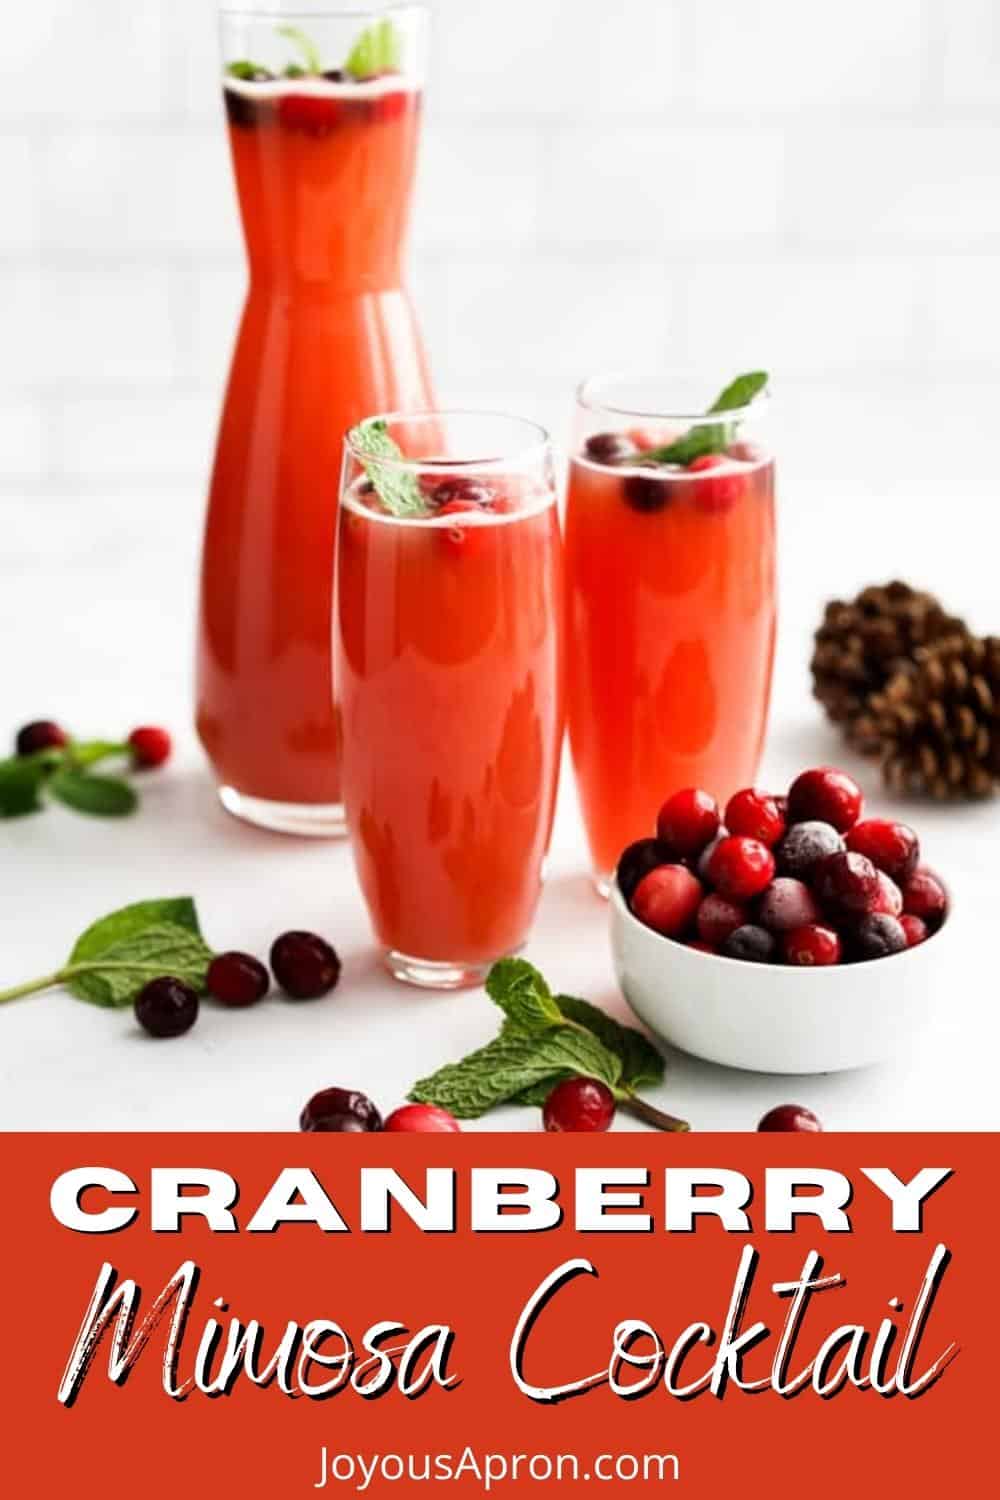 Cranberry Mimosa - Mimosa cocktail with a festive twist! This cranberry mimosa is a fizzy and delicious alcoholic drink perfect for the holidays! via @joyousapron